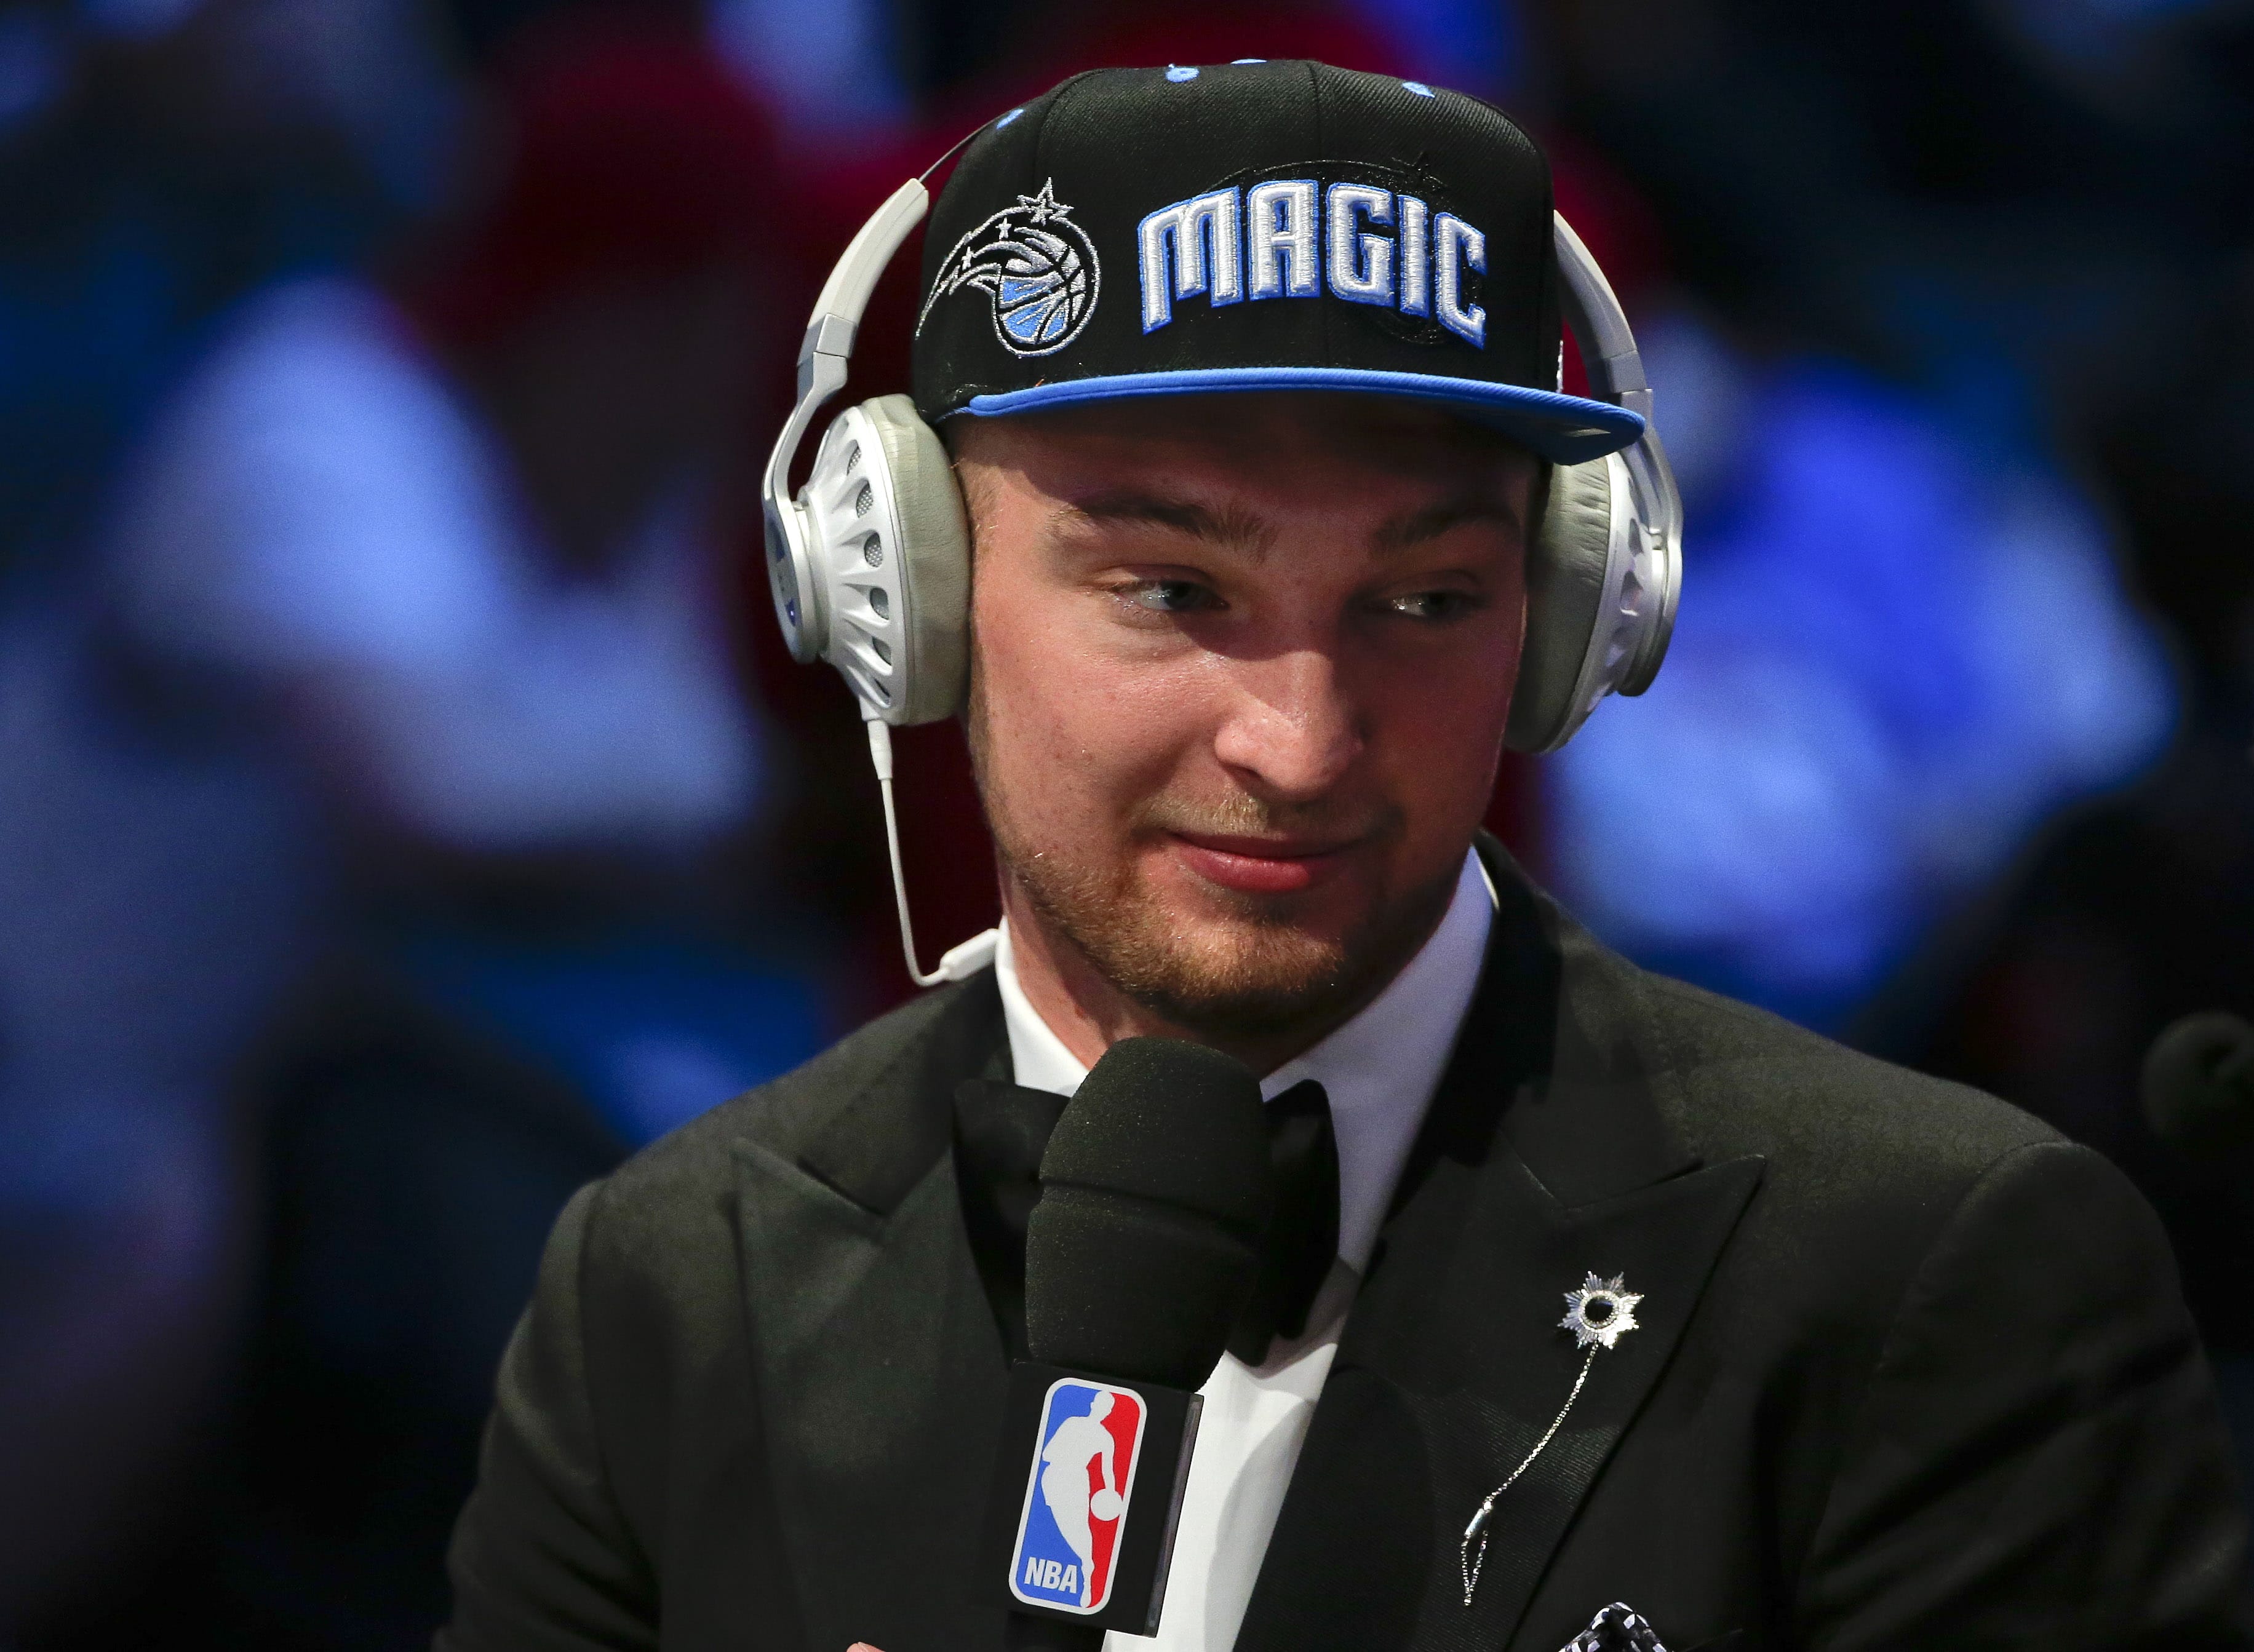 Domantas Sabonis answers questions during an interview after being selected 11th overall by the Orlando Magic during the NBA basketball draft, Thursday, June 23, 2016, in New York.